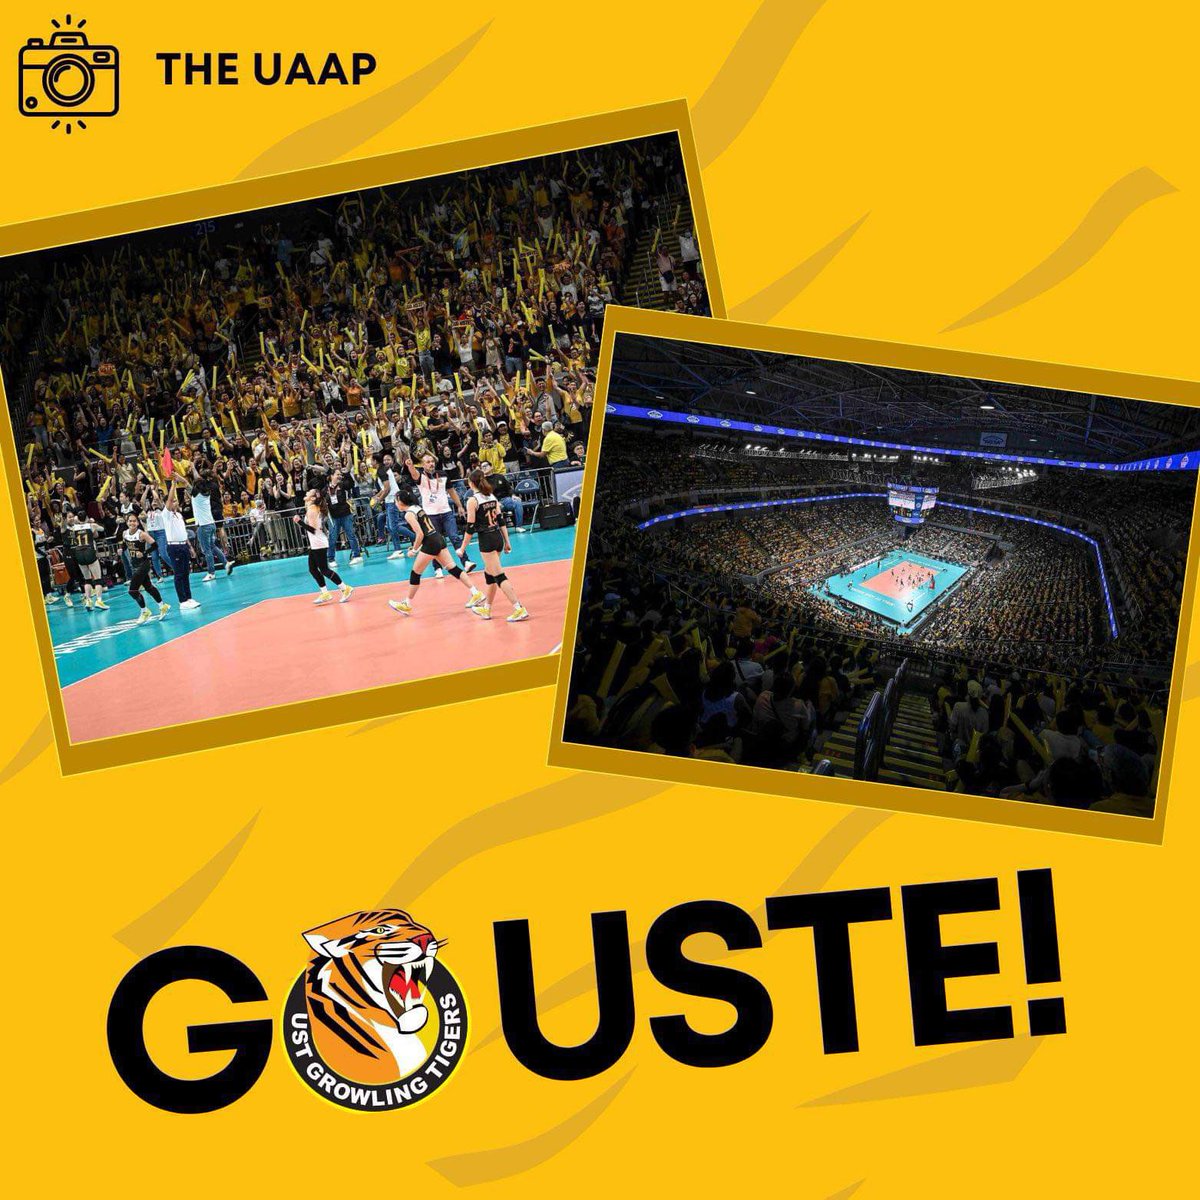 UST COMMUNITY, we dominated the crowd yesterday, because of you! ✅ 5,700 Yellow Clappers ✅ 900 Balloon Tiger Headbands ✅ 500 “GO USTE” Banners ✅ GO USTE Placards Next: MVT’s FINALS TICKET WVT’s Championship Again, maraming salamat at UST BAYANIHAN ulit. #goUSTe 💛🐯